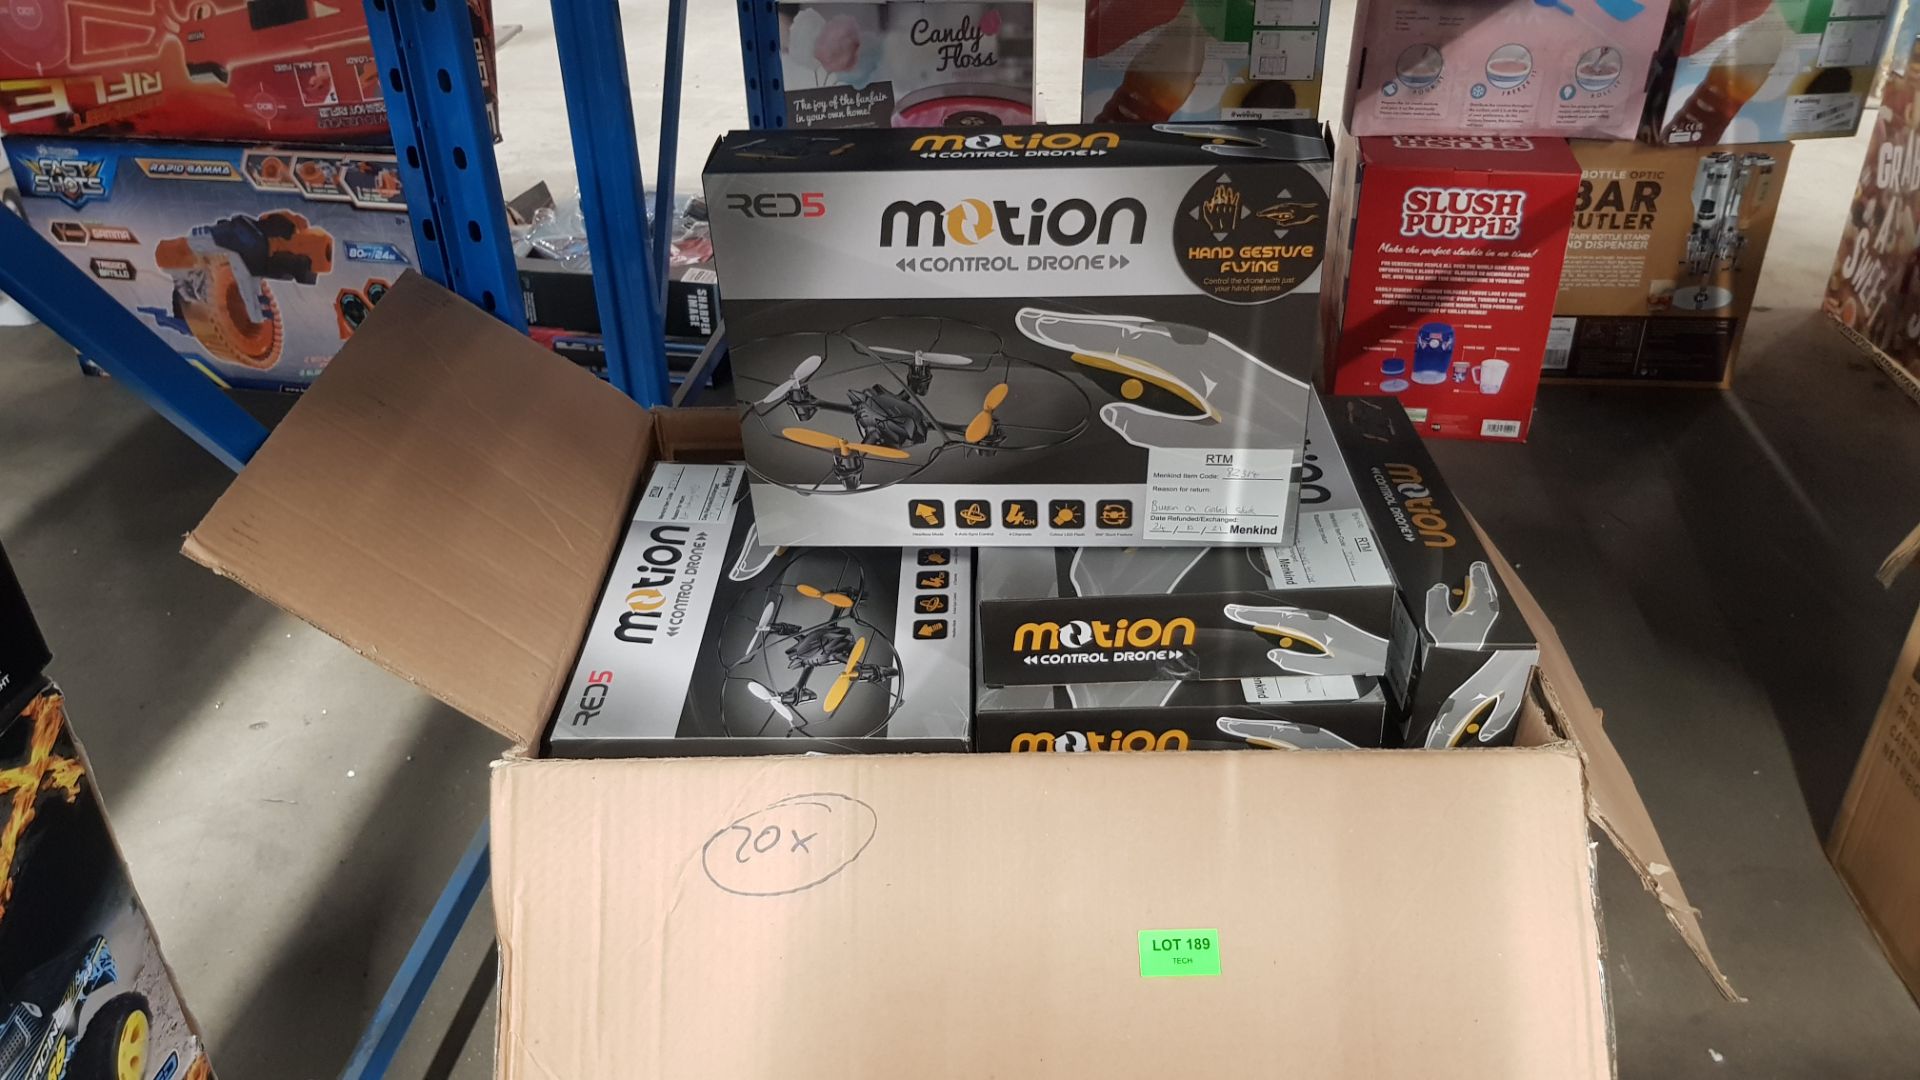 (7J) Lot RRP £600. 20x Red5 Motion Control Drone (Yellow/Black) RRP £30 Each. (Units Have Return T - Image 3 of 3